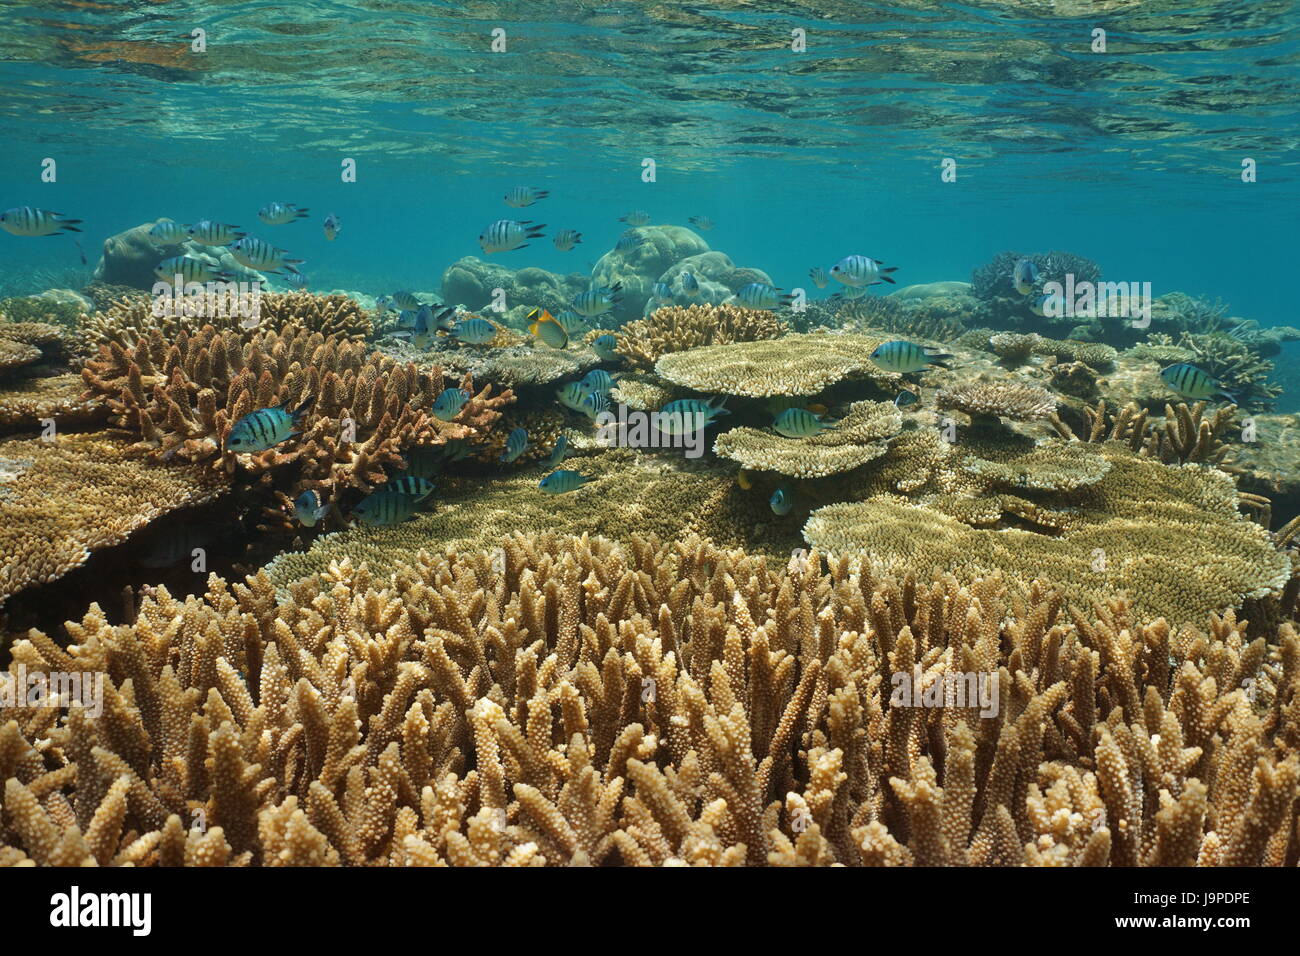 Underwater coral reef with fish in healthy condition in shallow water, south Pacific ocean, New Caledonia, Oceania Stock Photo